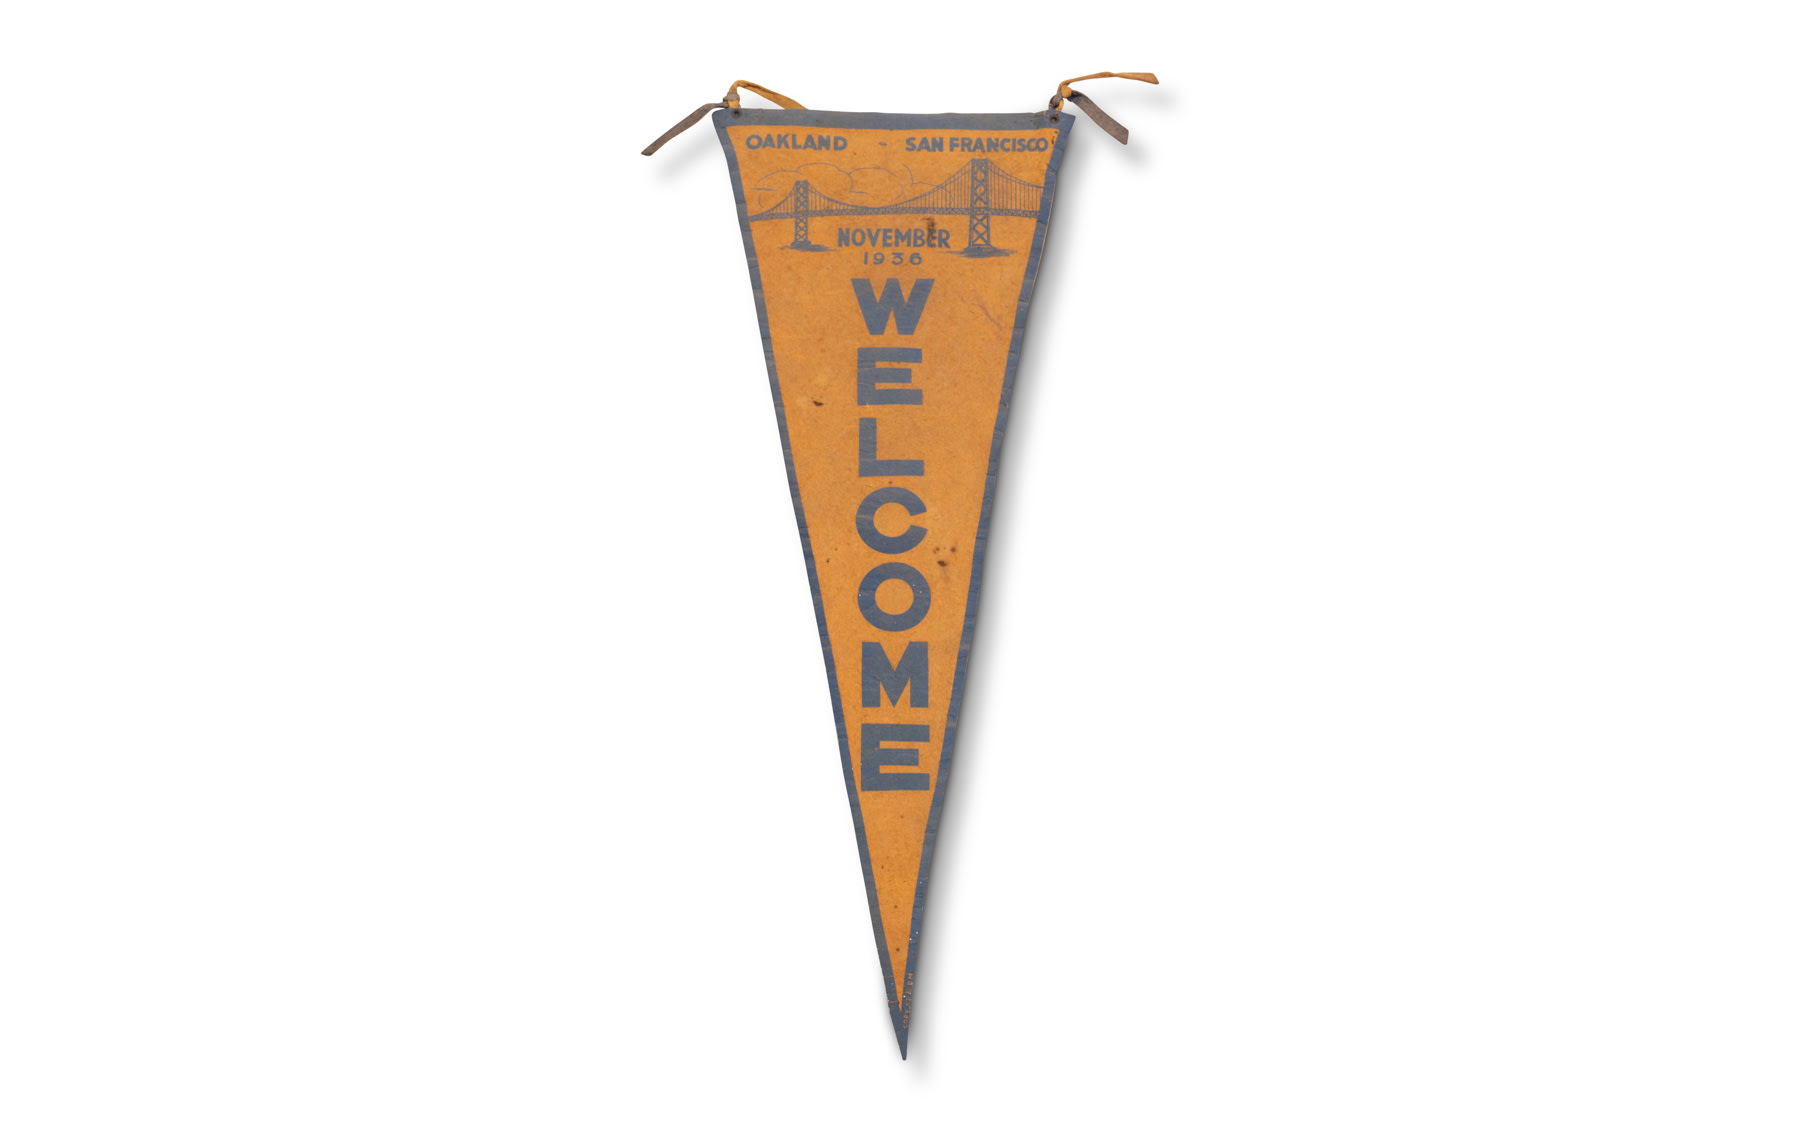 Oakland-San Francisco Welcome Pennant